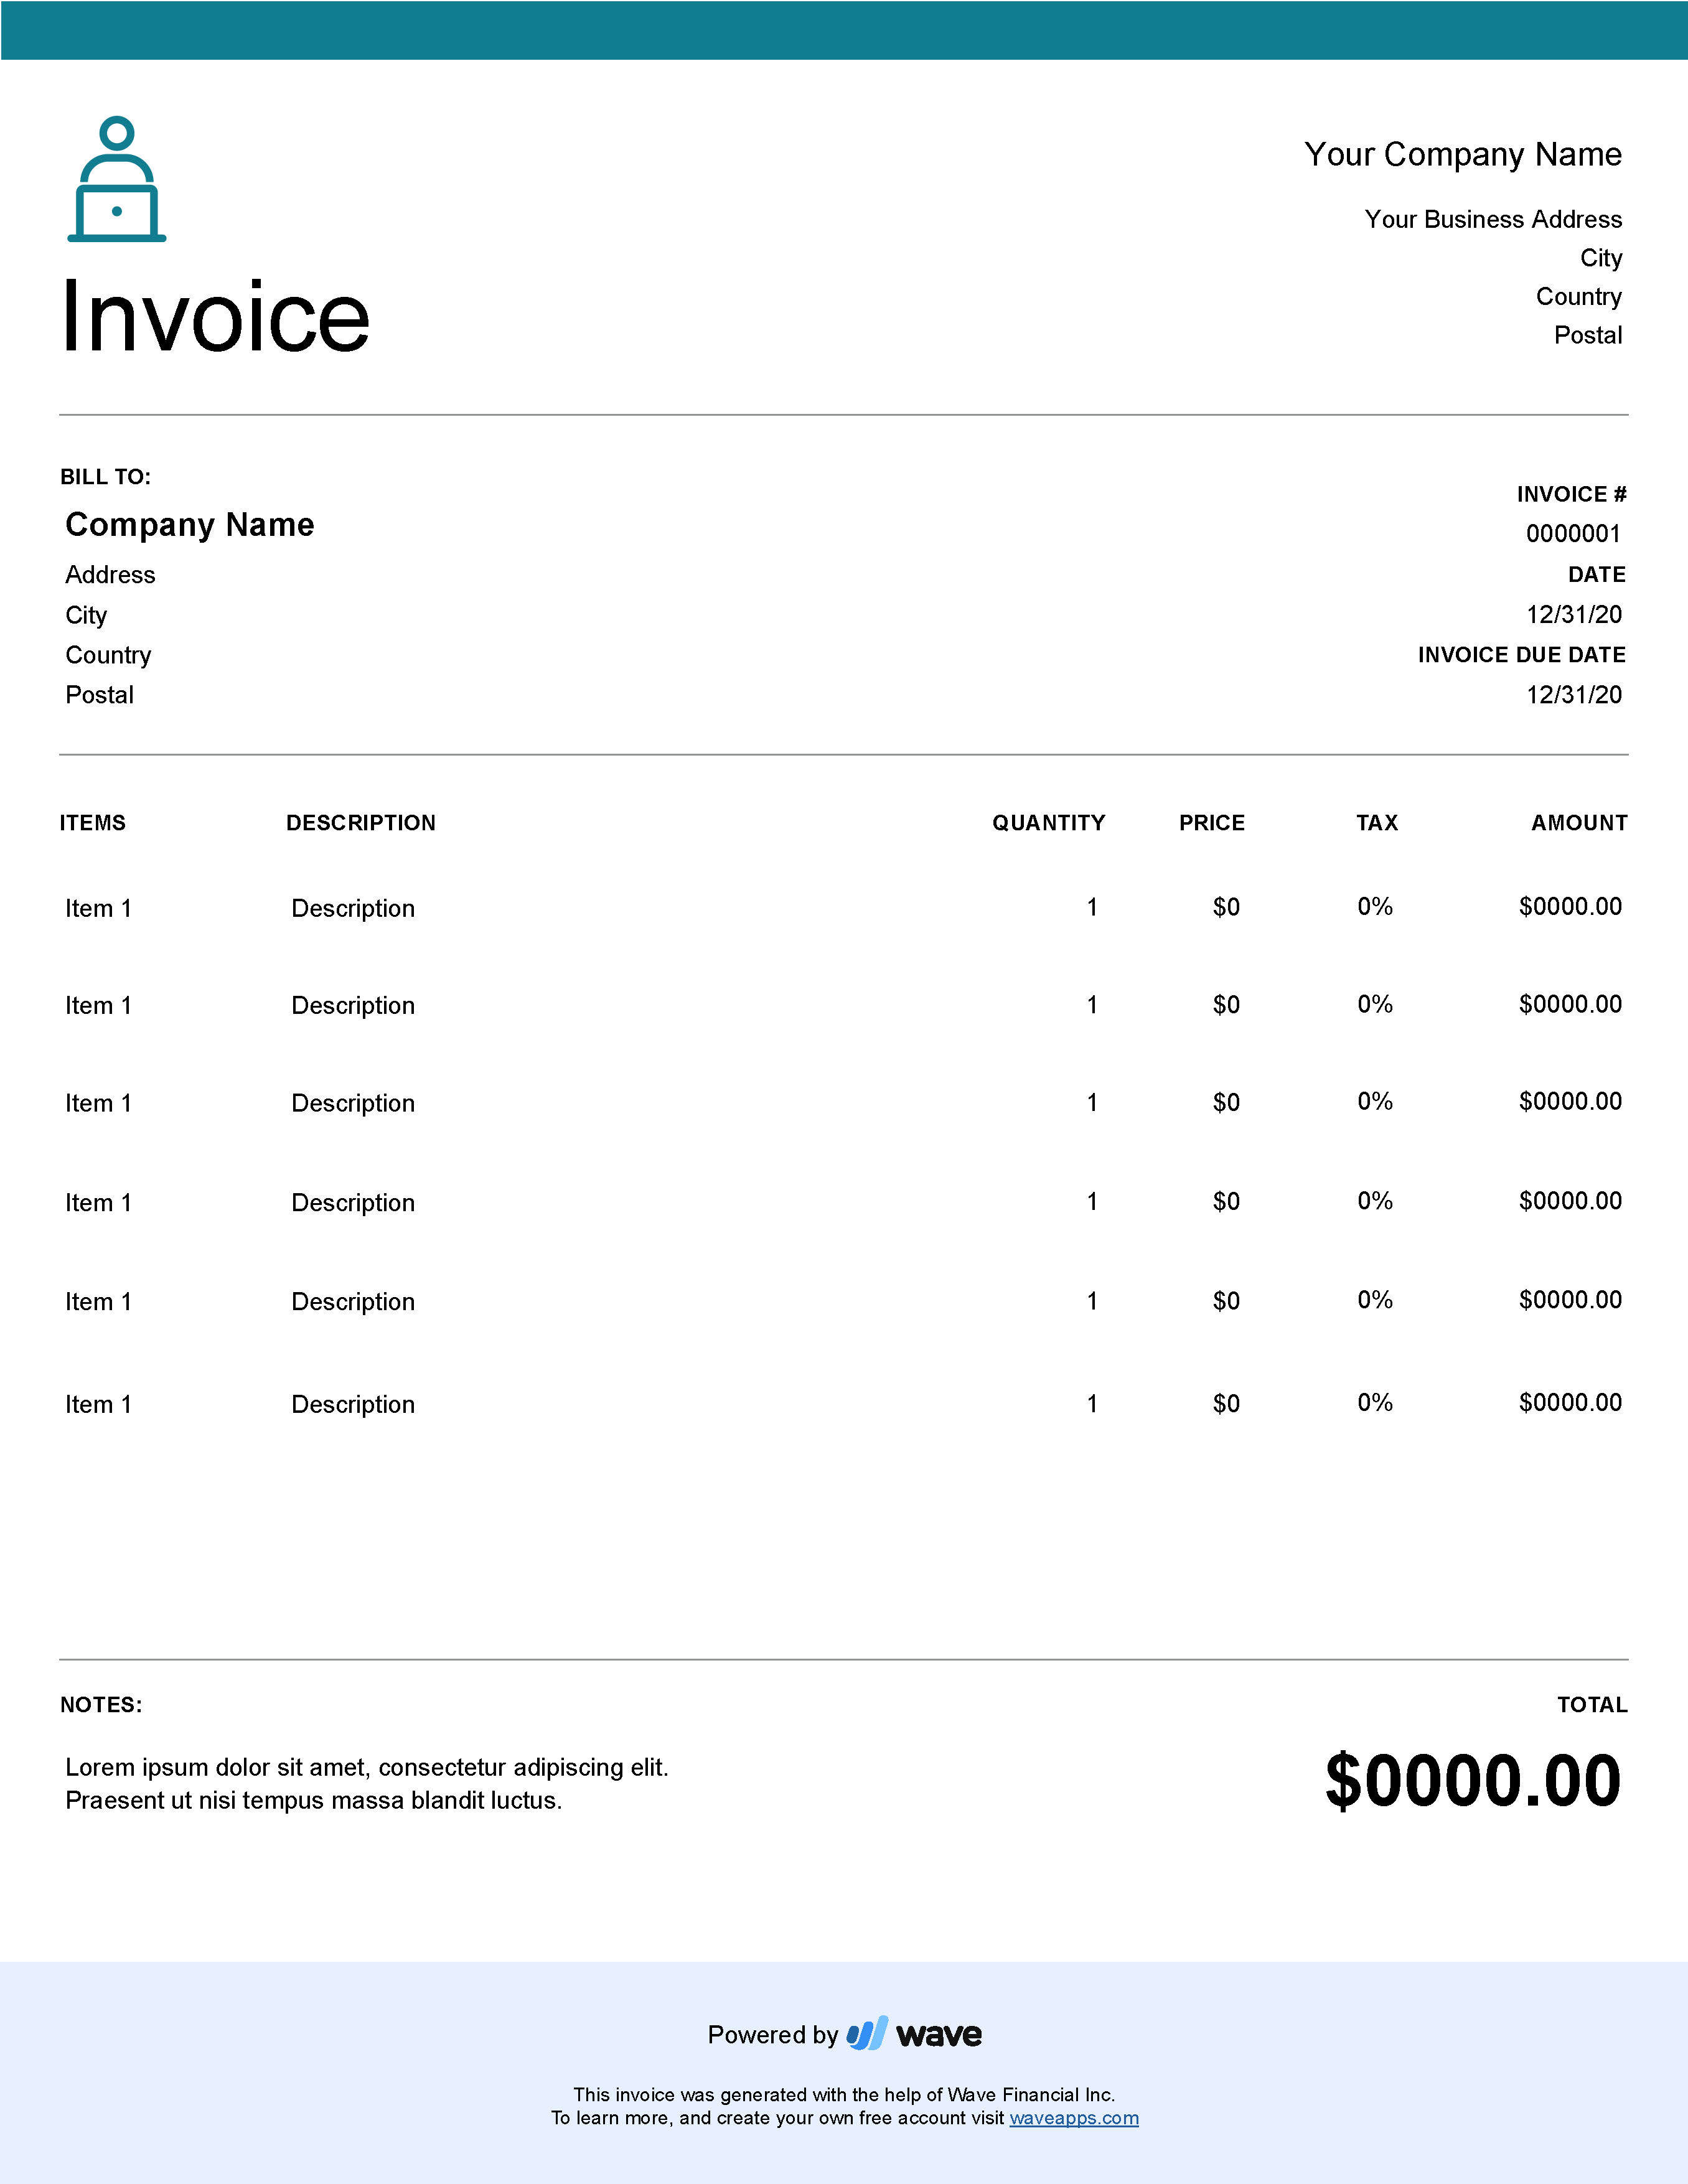 Invoice template preview